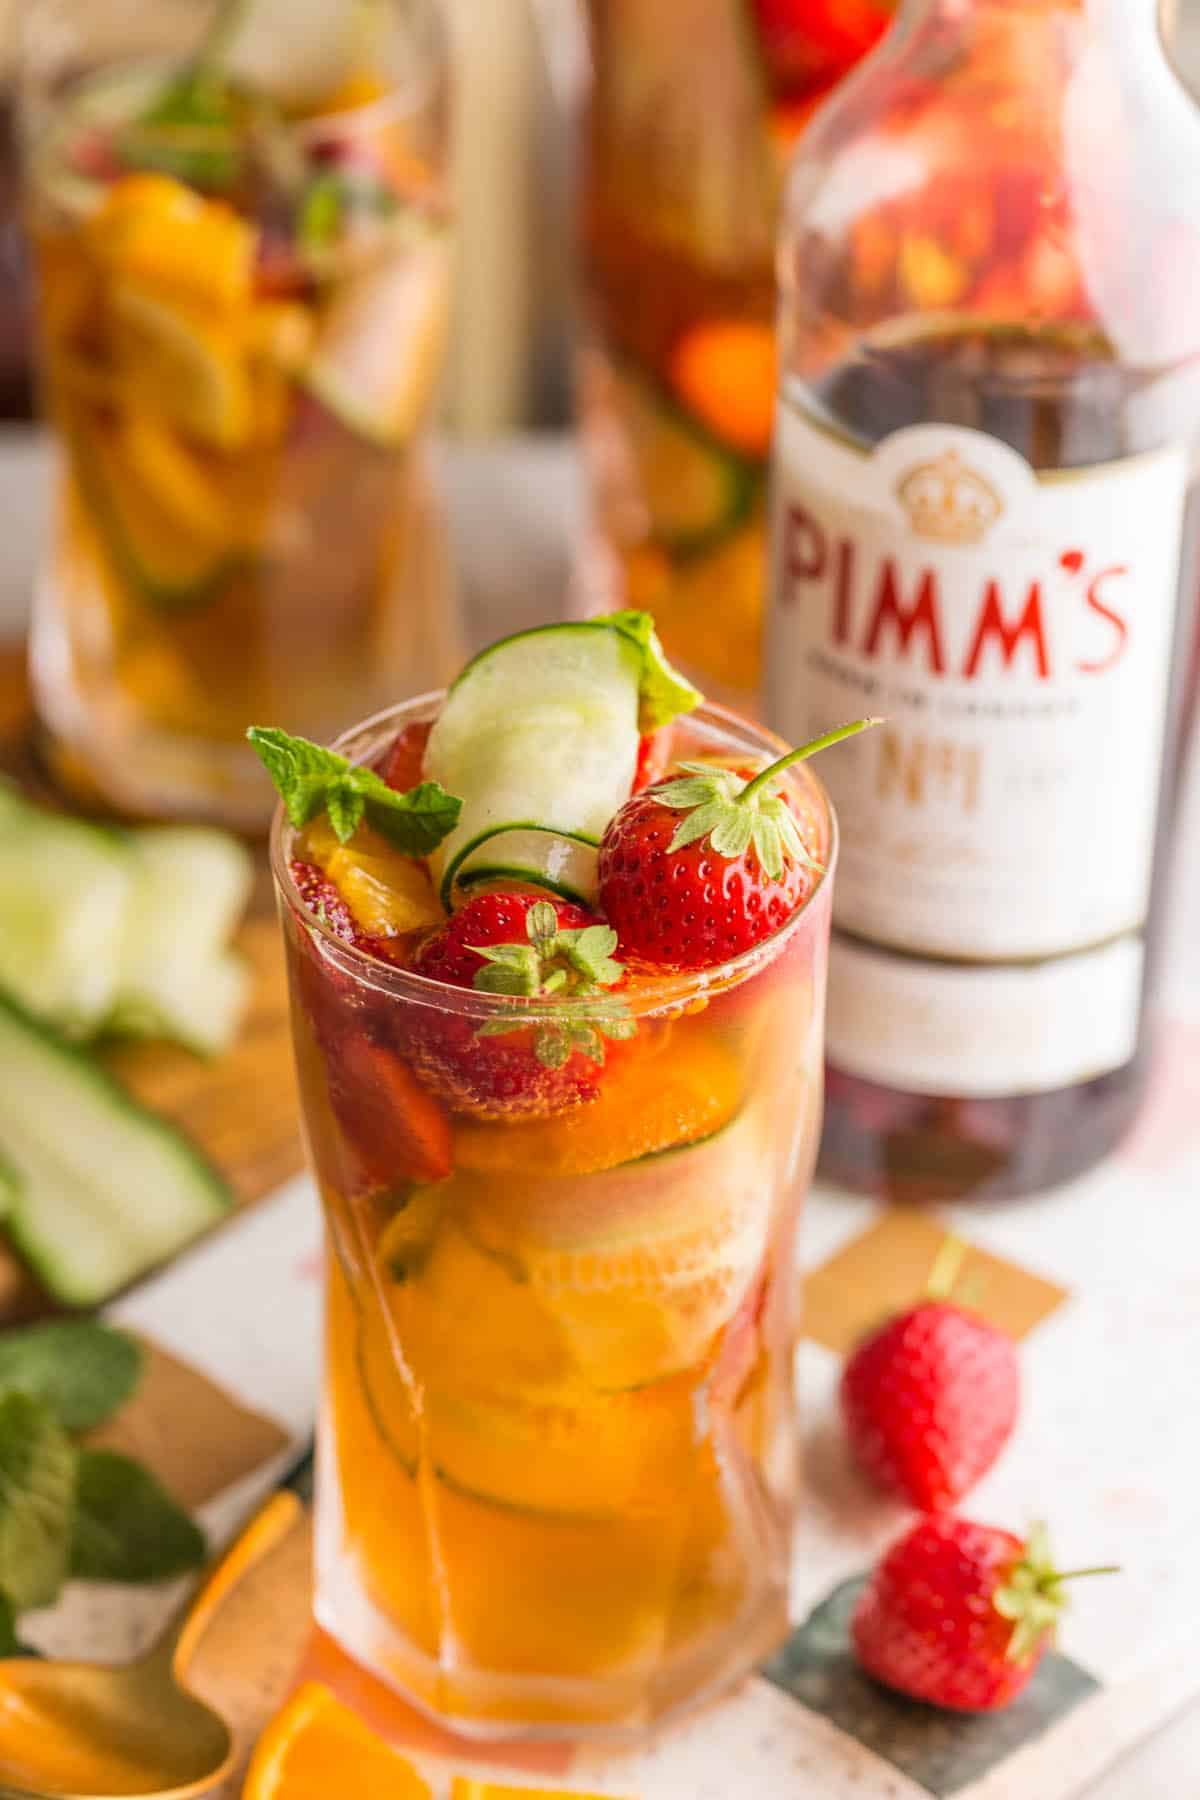 The Pimm's Cup Recipe